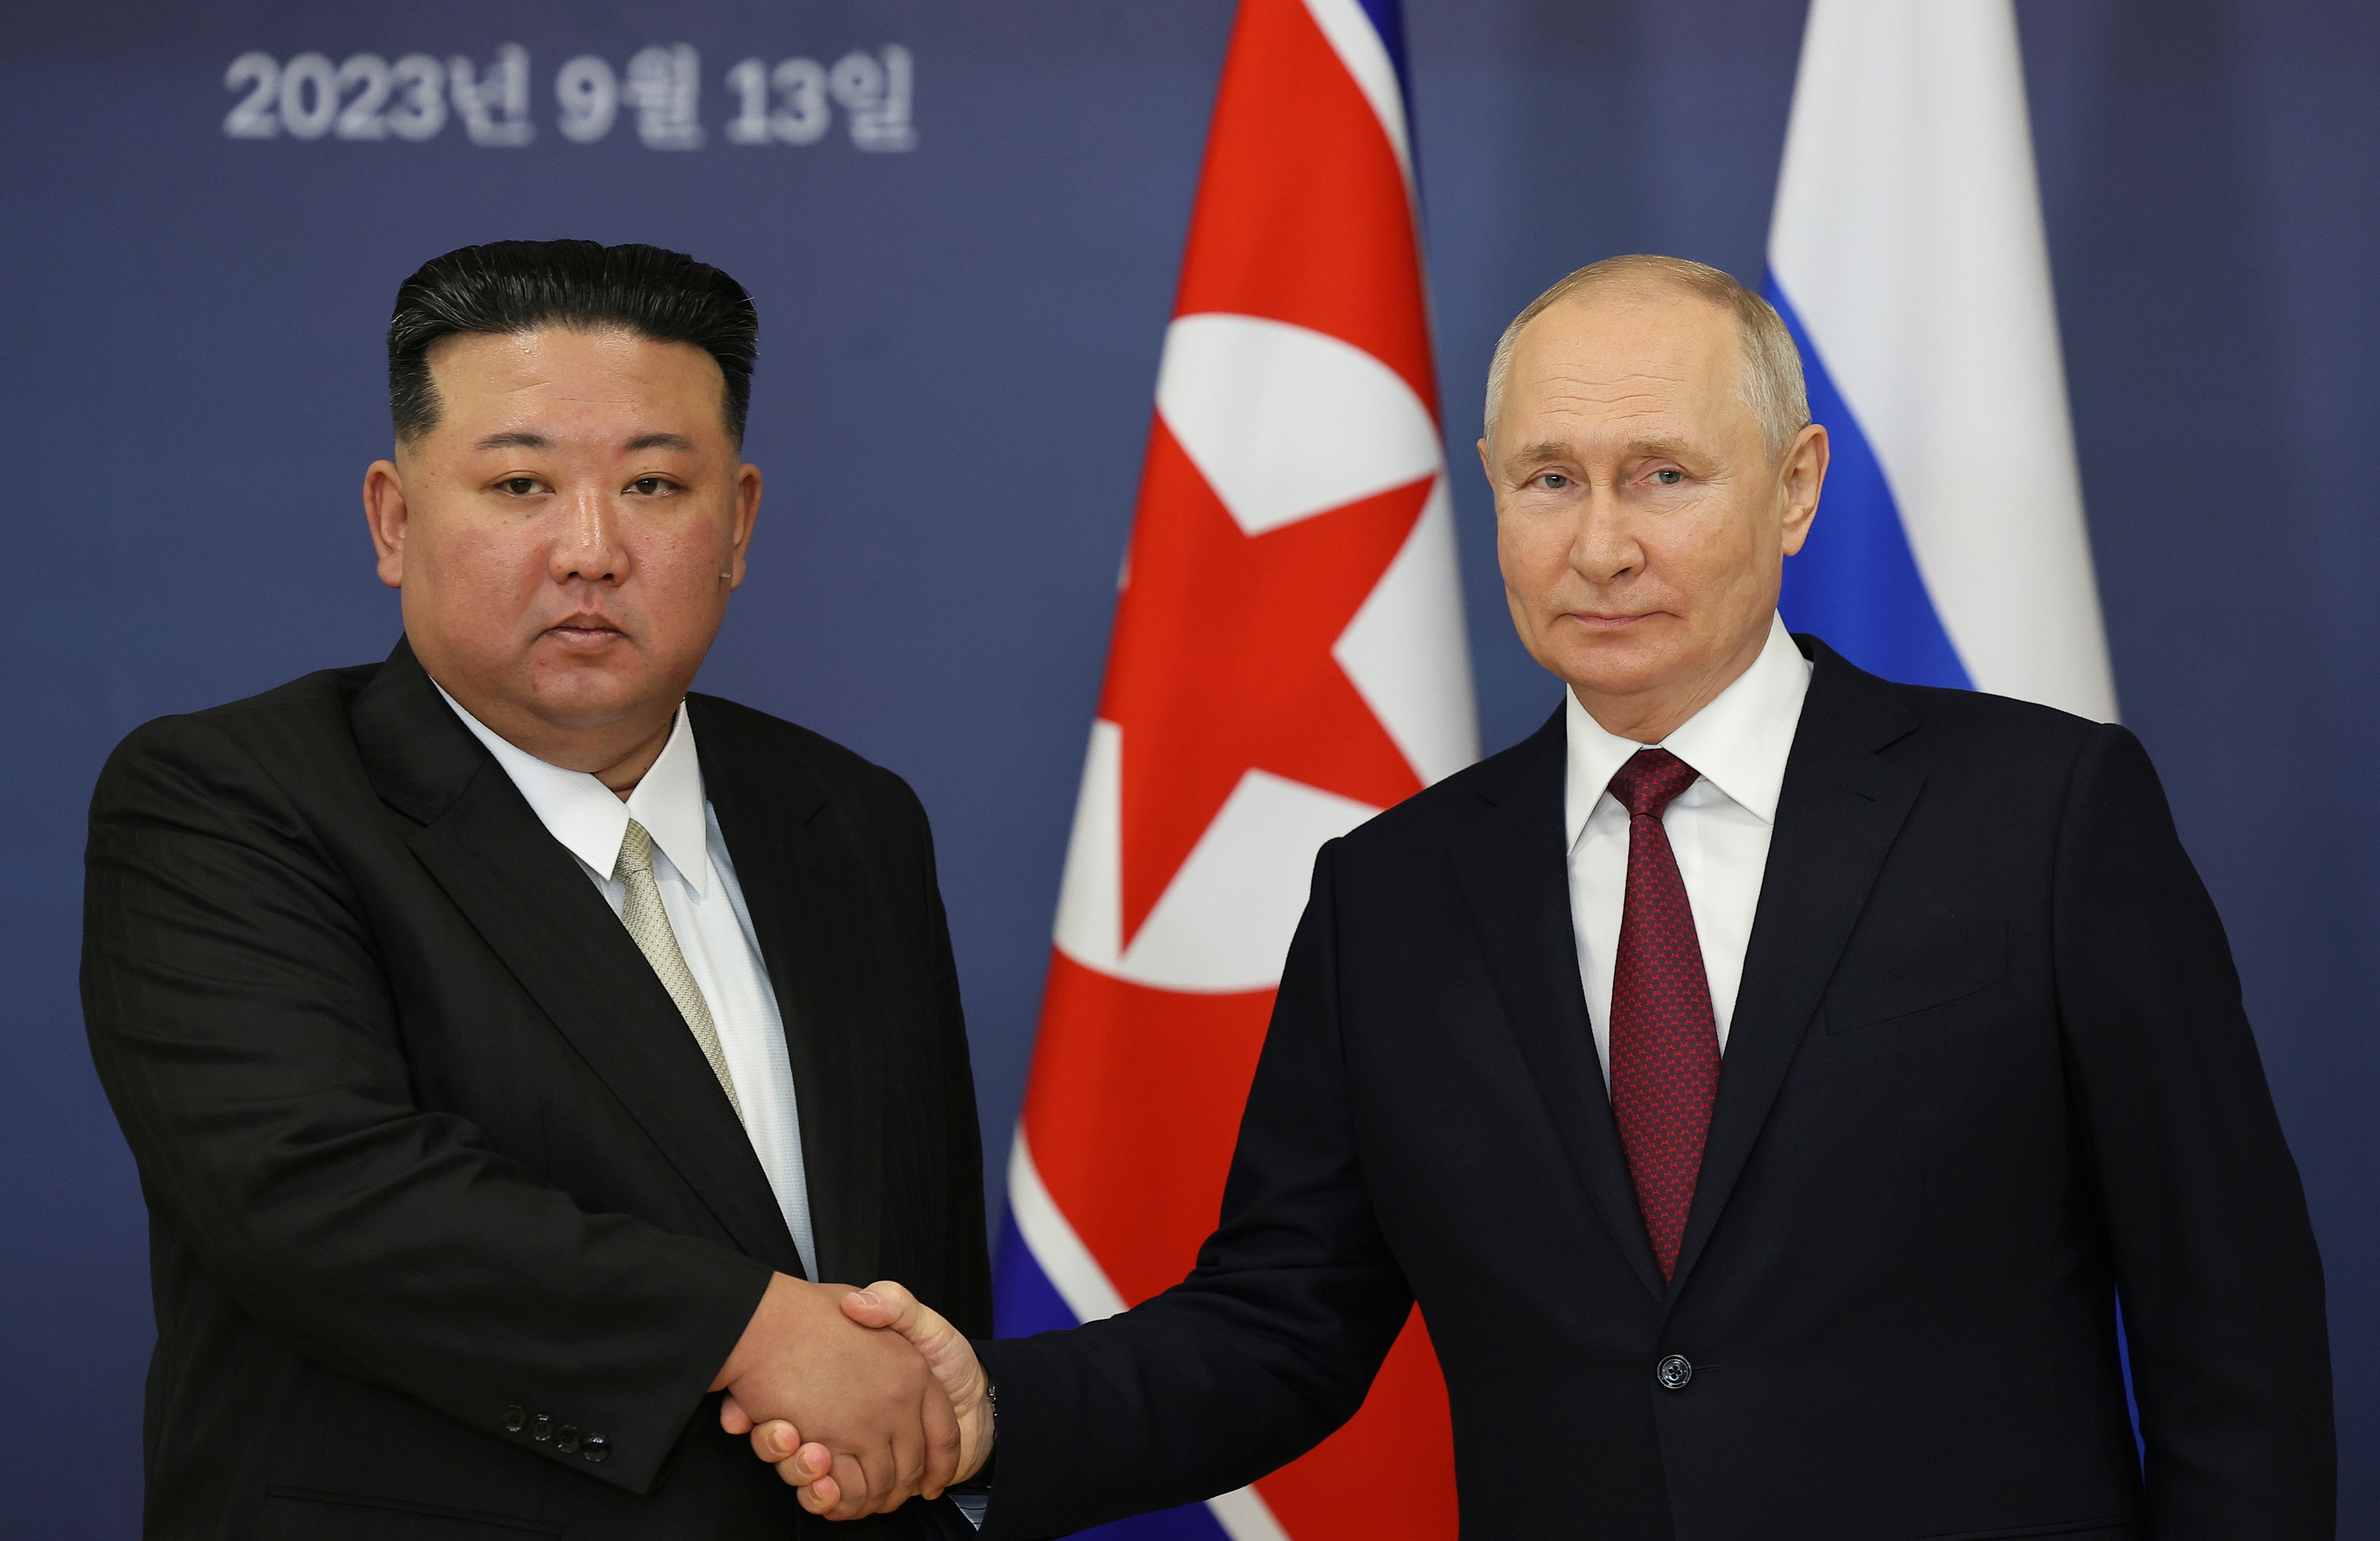 Vladimir Putin and Kim Jong-un shake hands during their meeting at the Vostochny Cosmodrome in the far eastern Amur region of Russia, on Wednesday